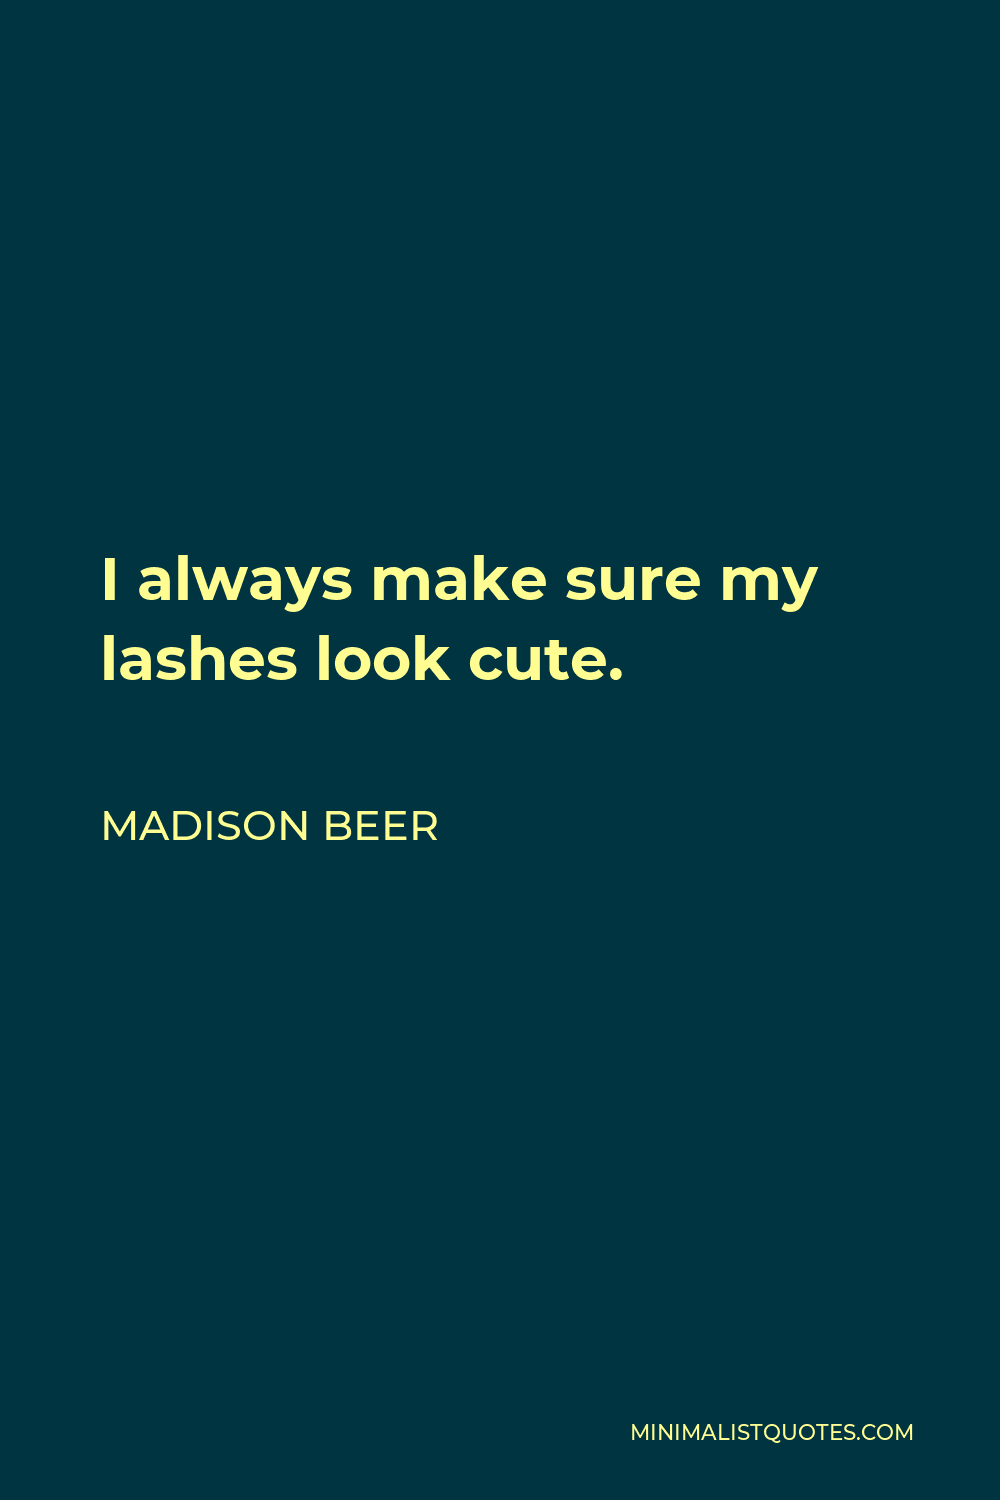 Madison Beer Quote - I always make sure my lashes look cute.